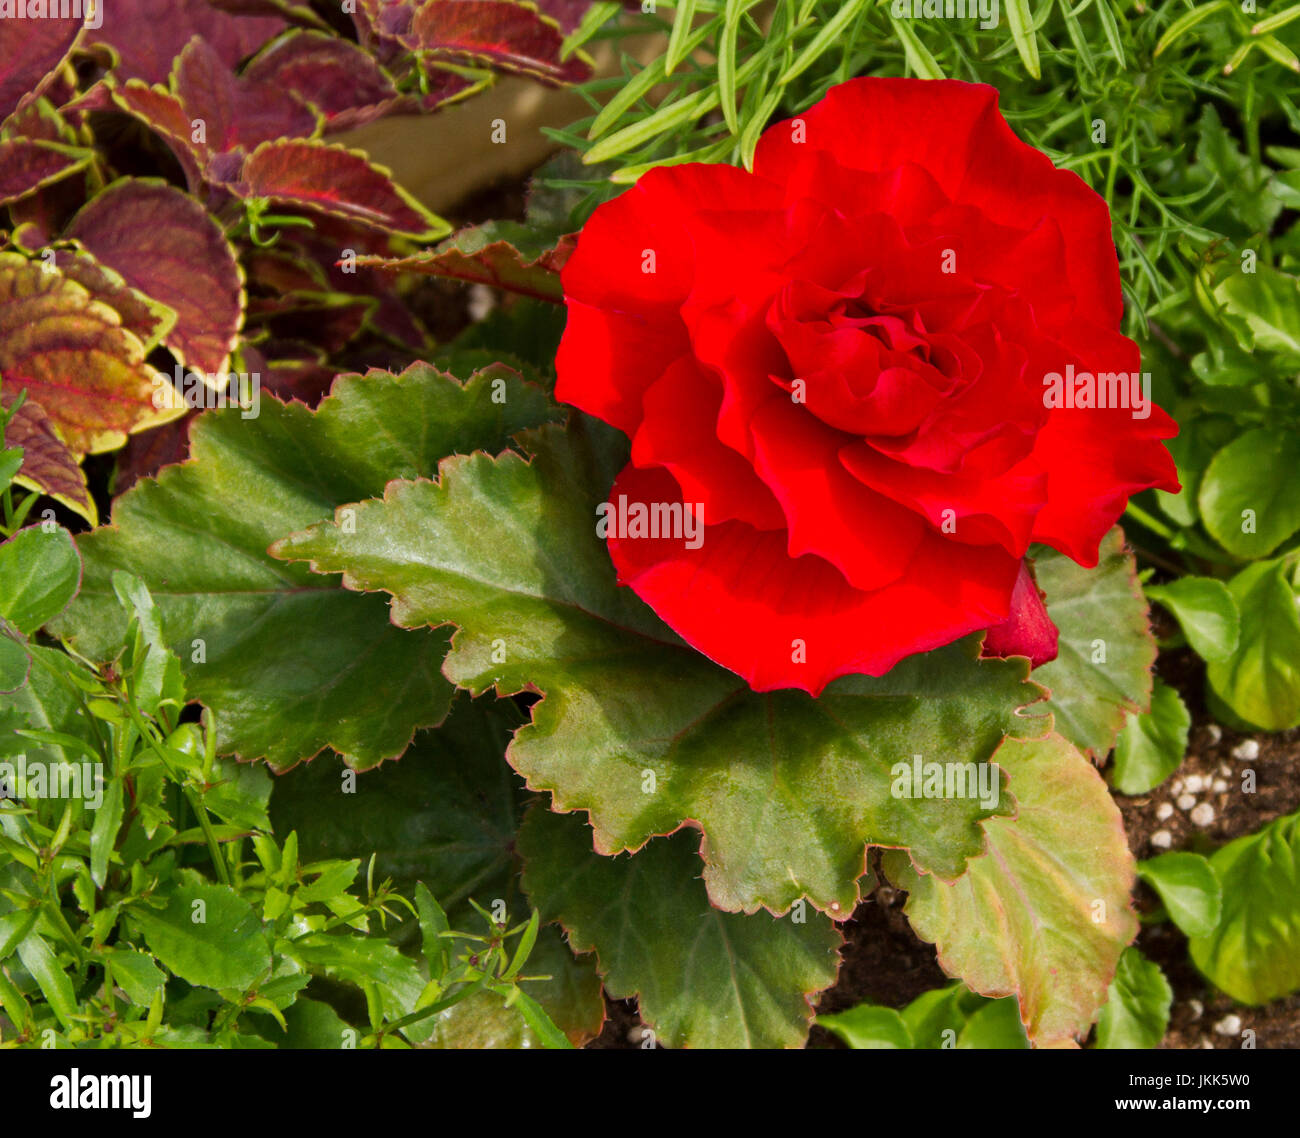 Vivid red flower and dark green leaves of tuberous begonia against background of other green foliage Stock Photo